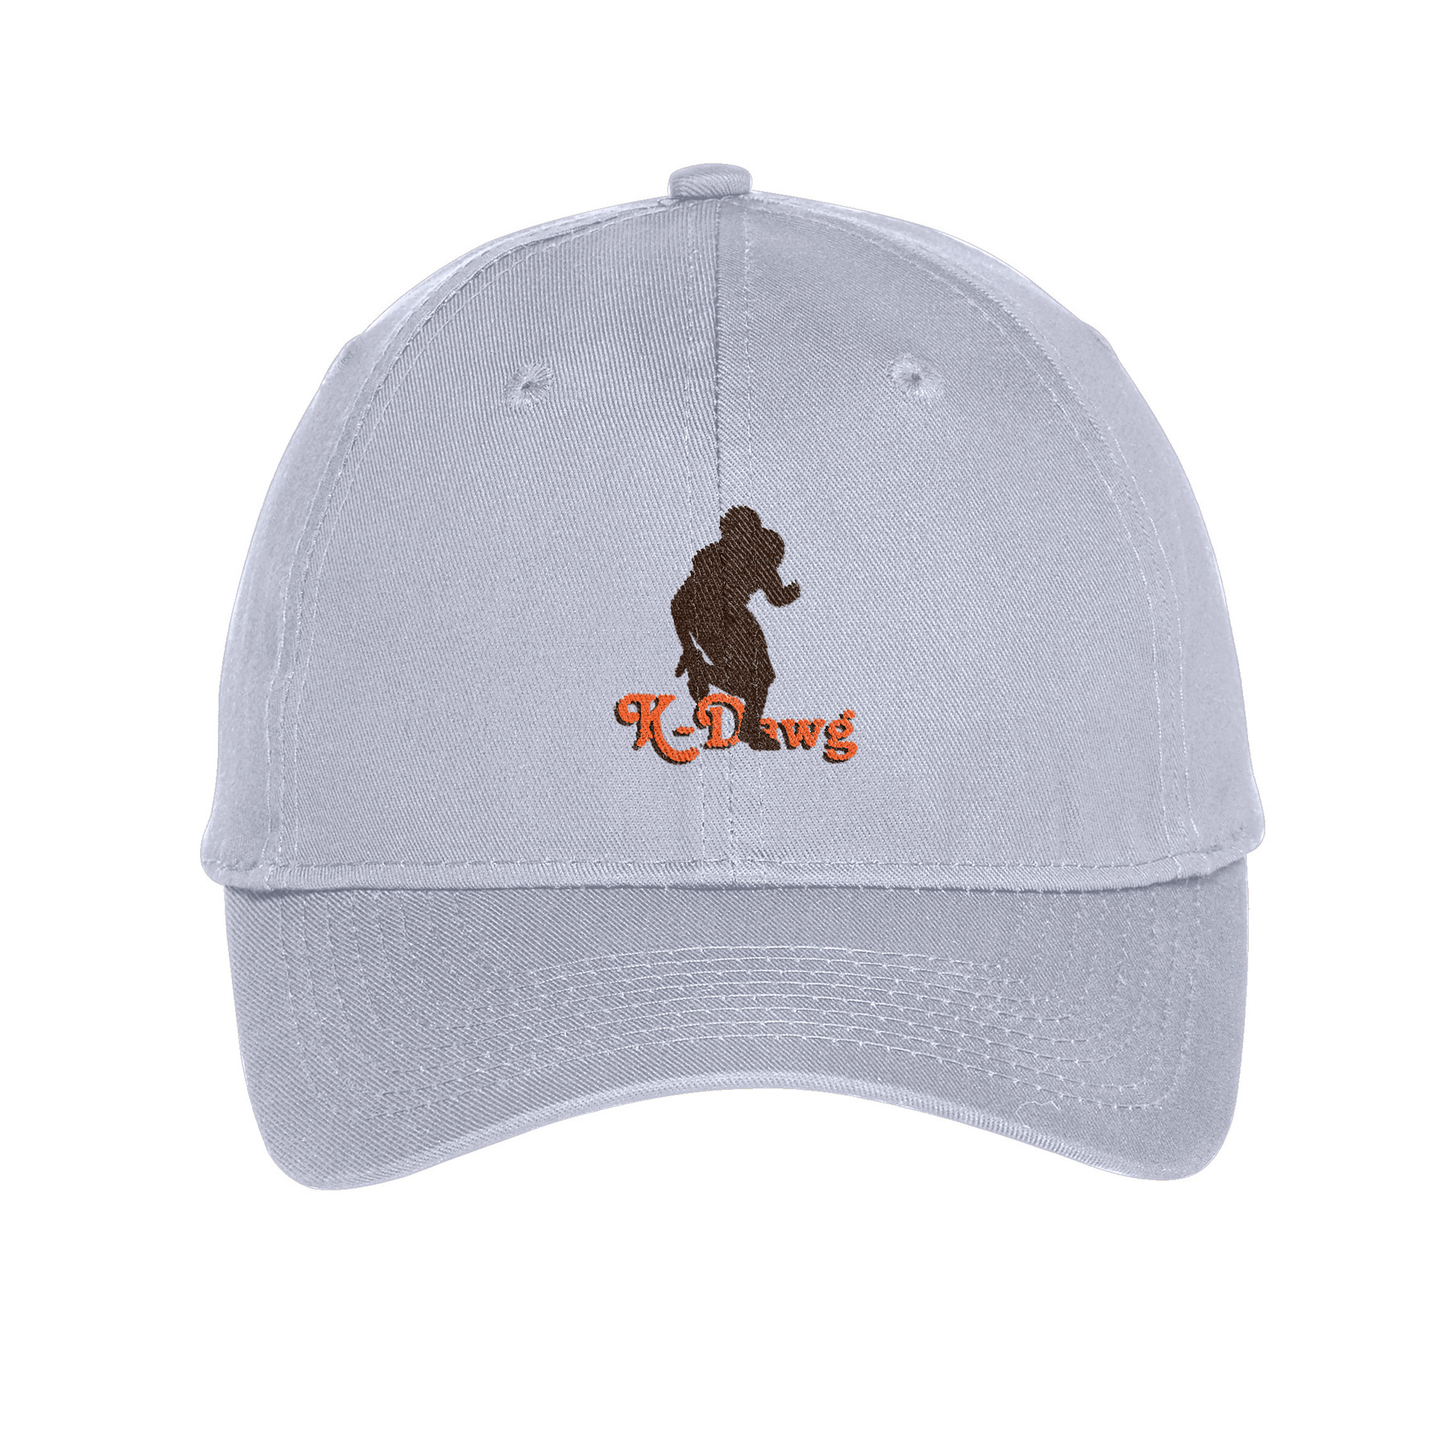 GT K-Dawg Embroidered Twill Cap